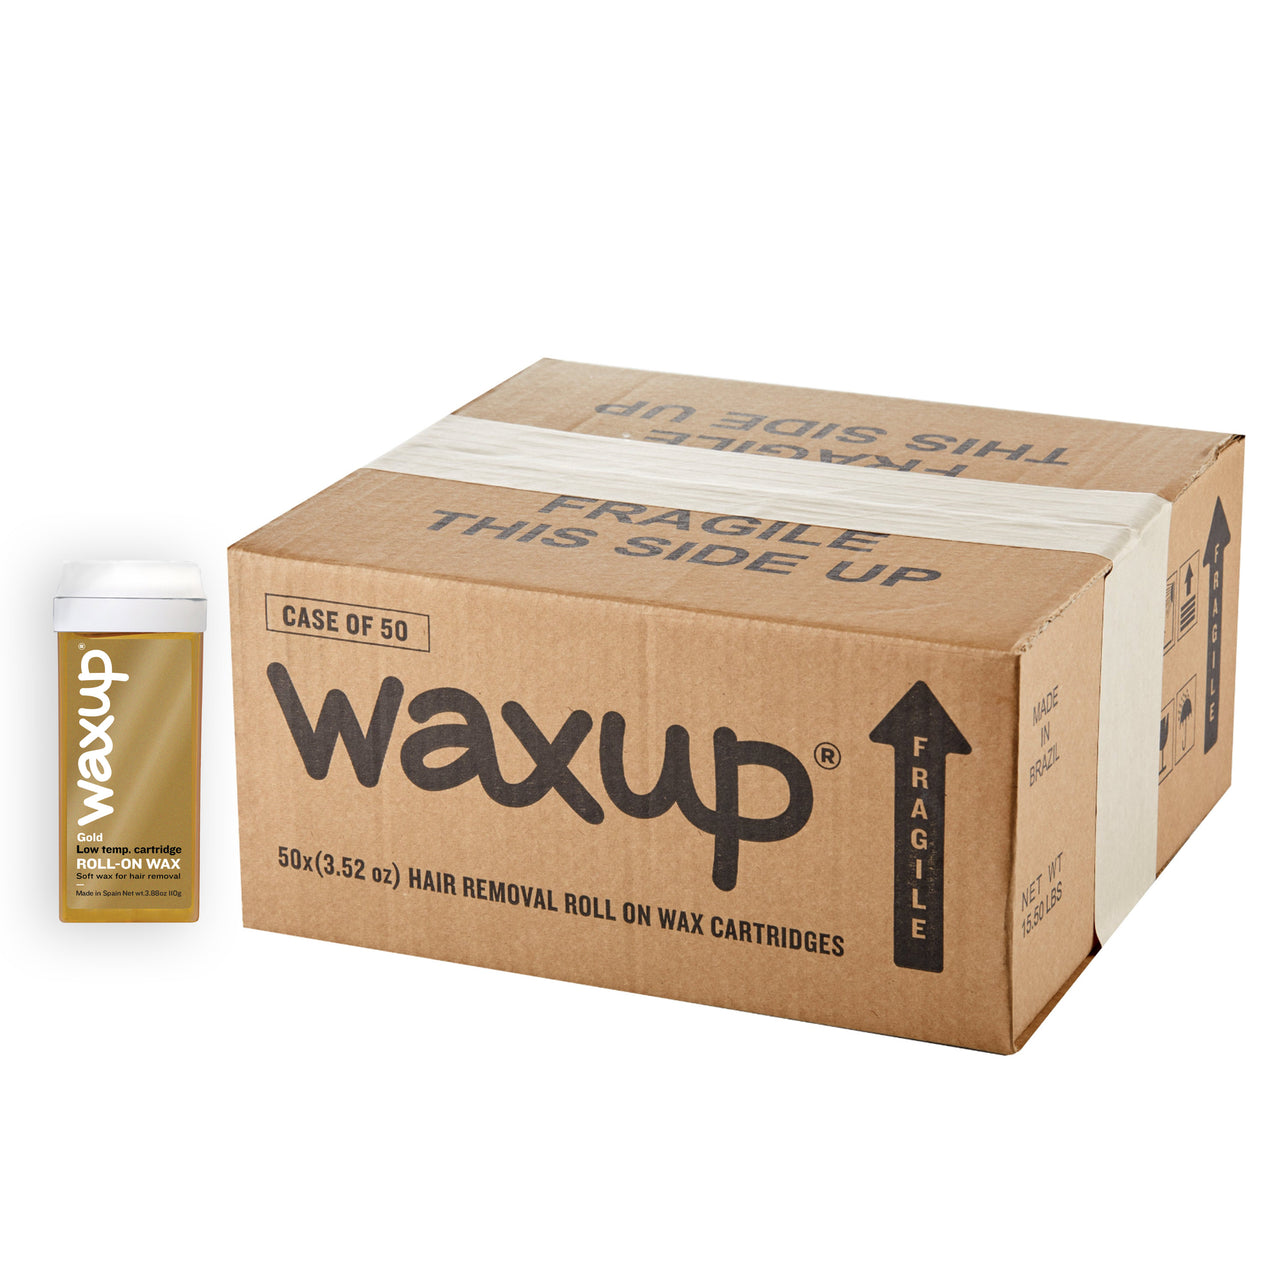 Elite Gold Roll On Wax Cartridges Case of 50 - thatswaxup -  - Roll On Wax - waxup hair removal wax body waxing kit women and men professional waxing supplies